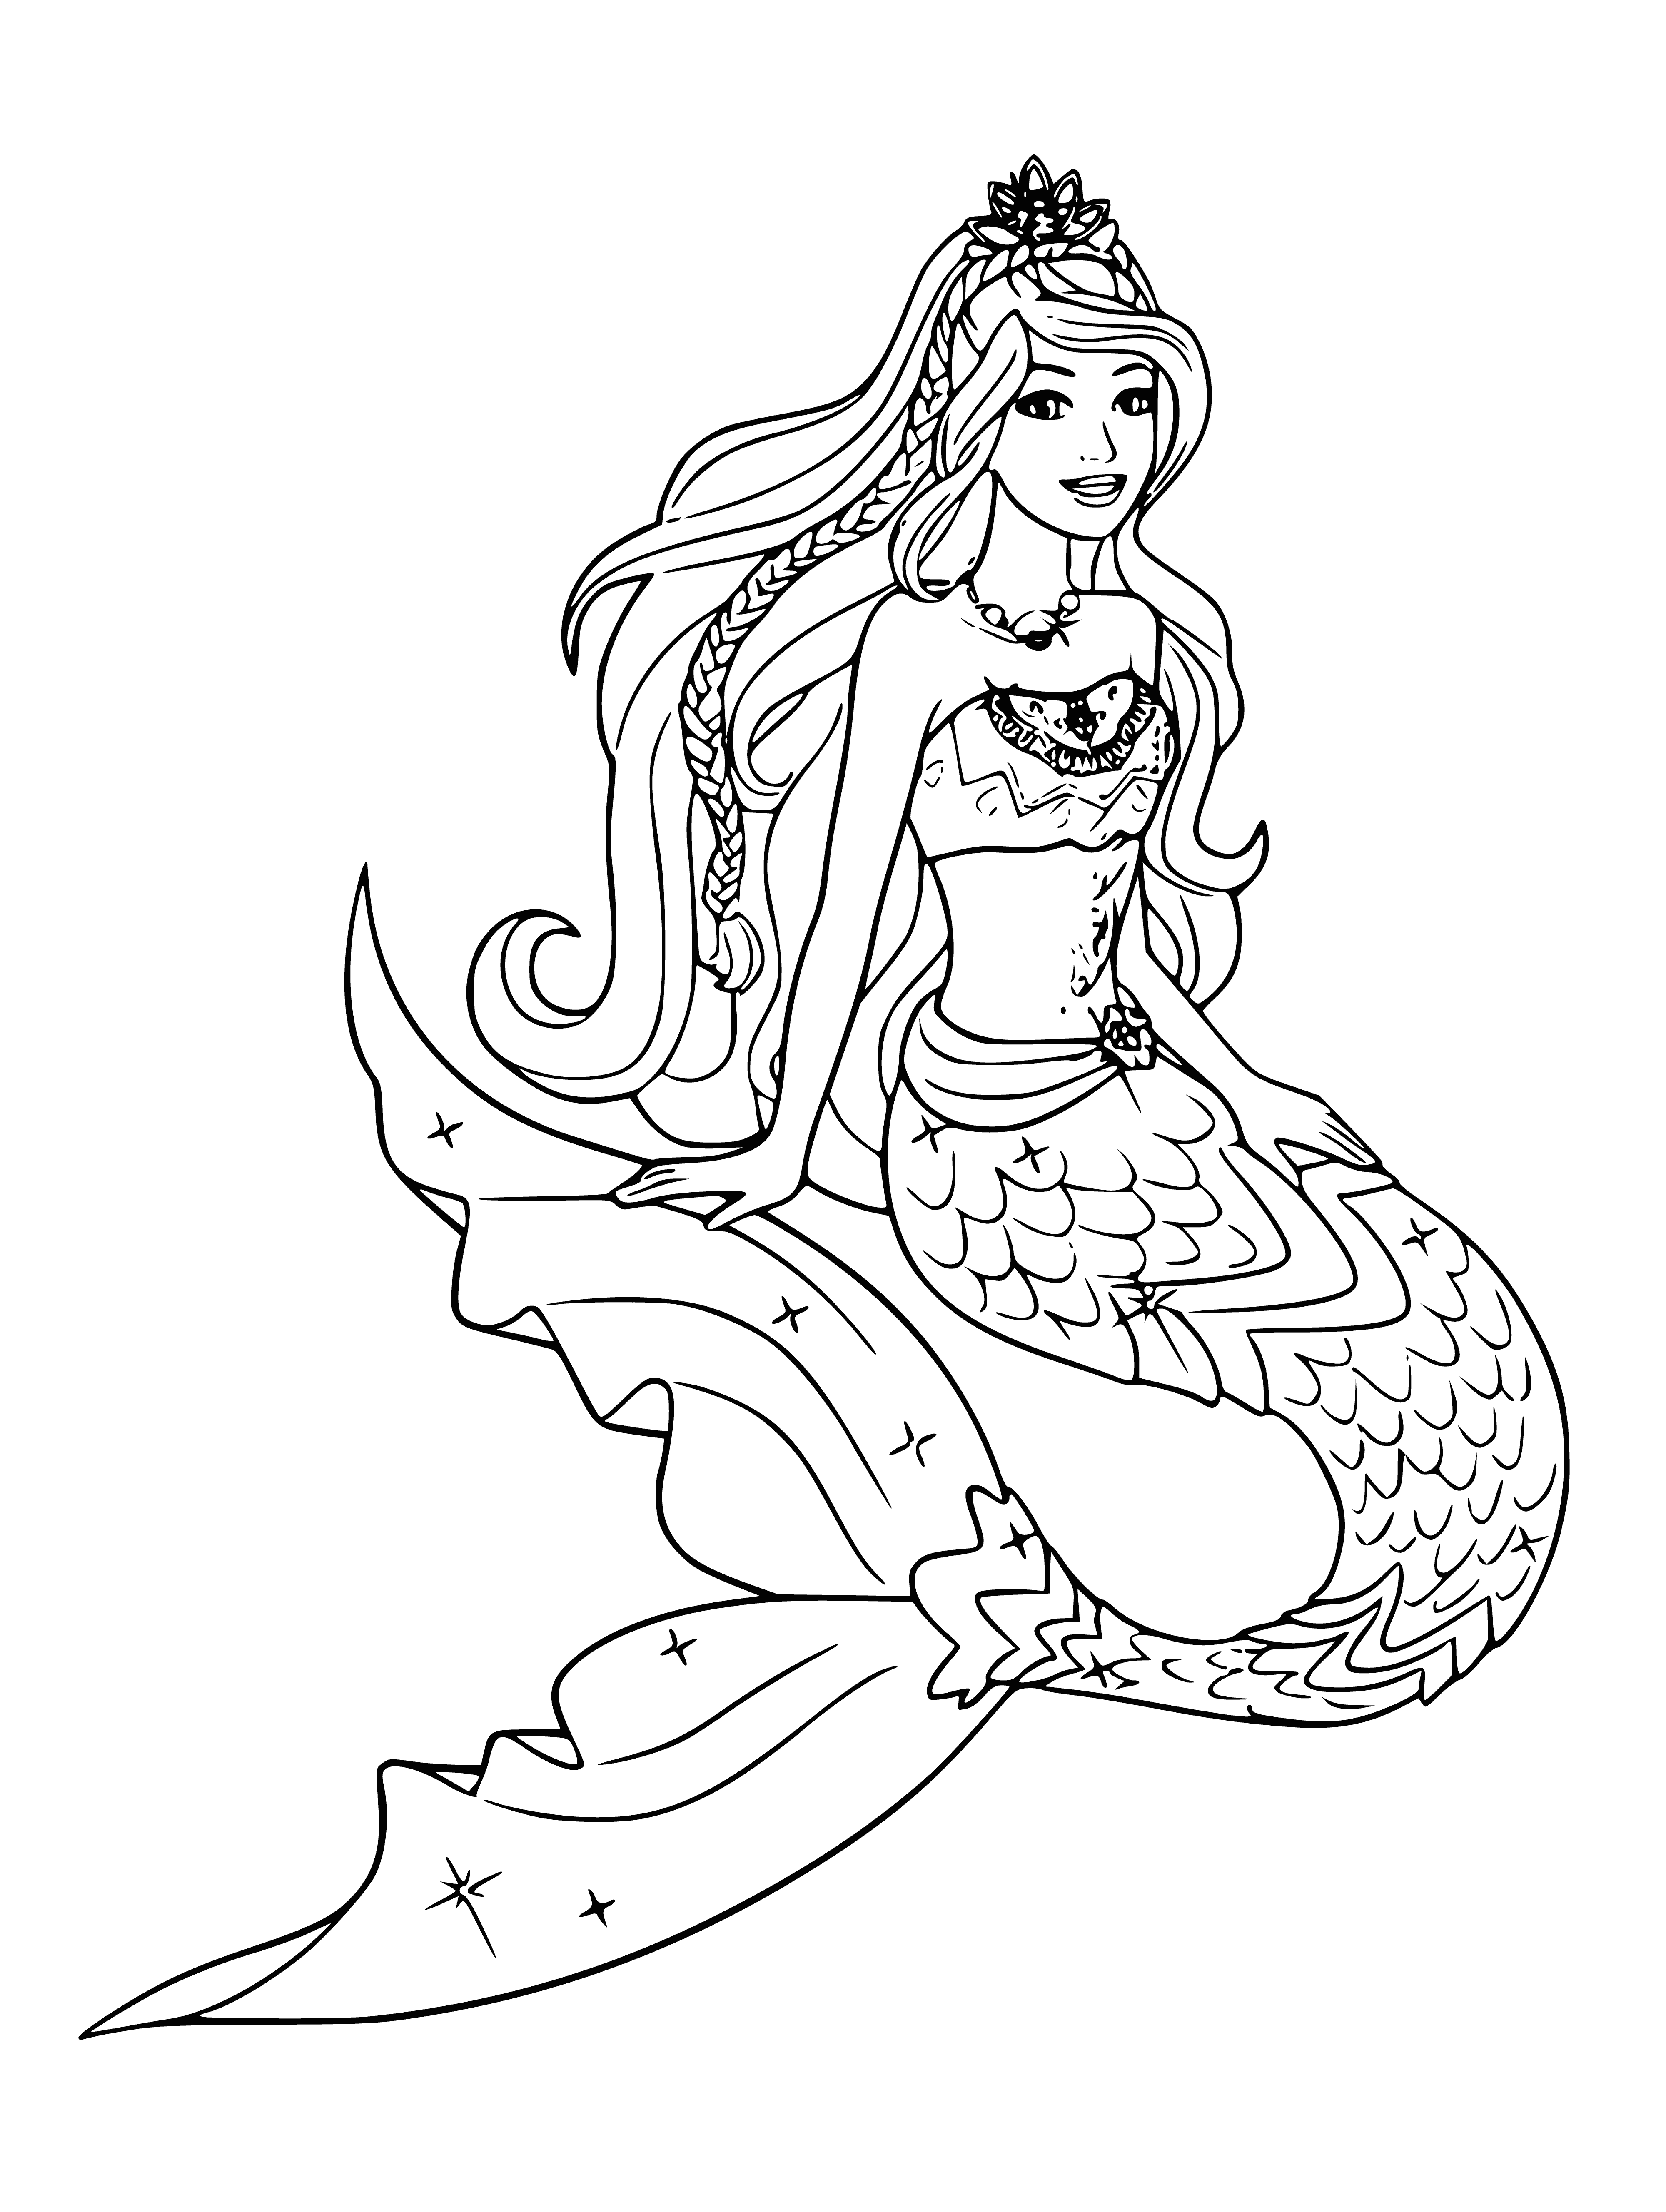 coloring page: Barbie the Little Mermaid is beautiful and sits on a coral reef with her arms raised, wearing a pink bikini and purple clam-shell necklace, with a happy fish swimming around her.